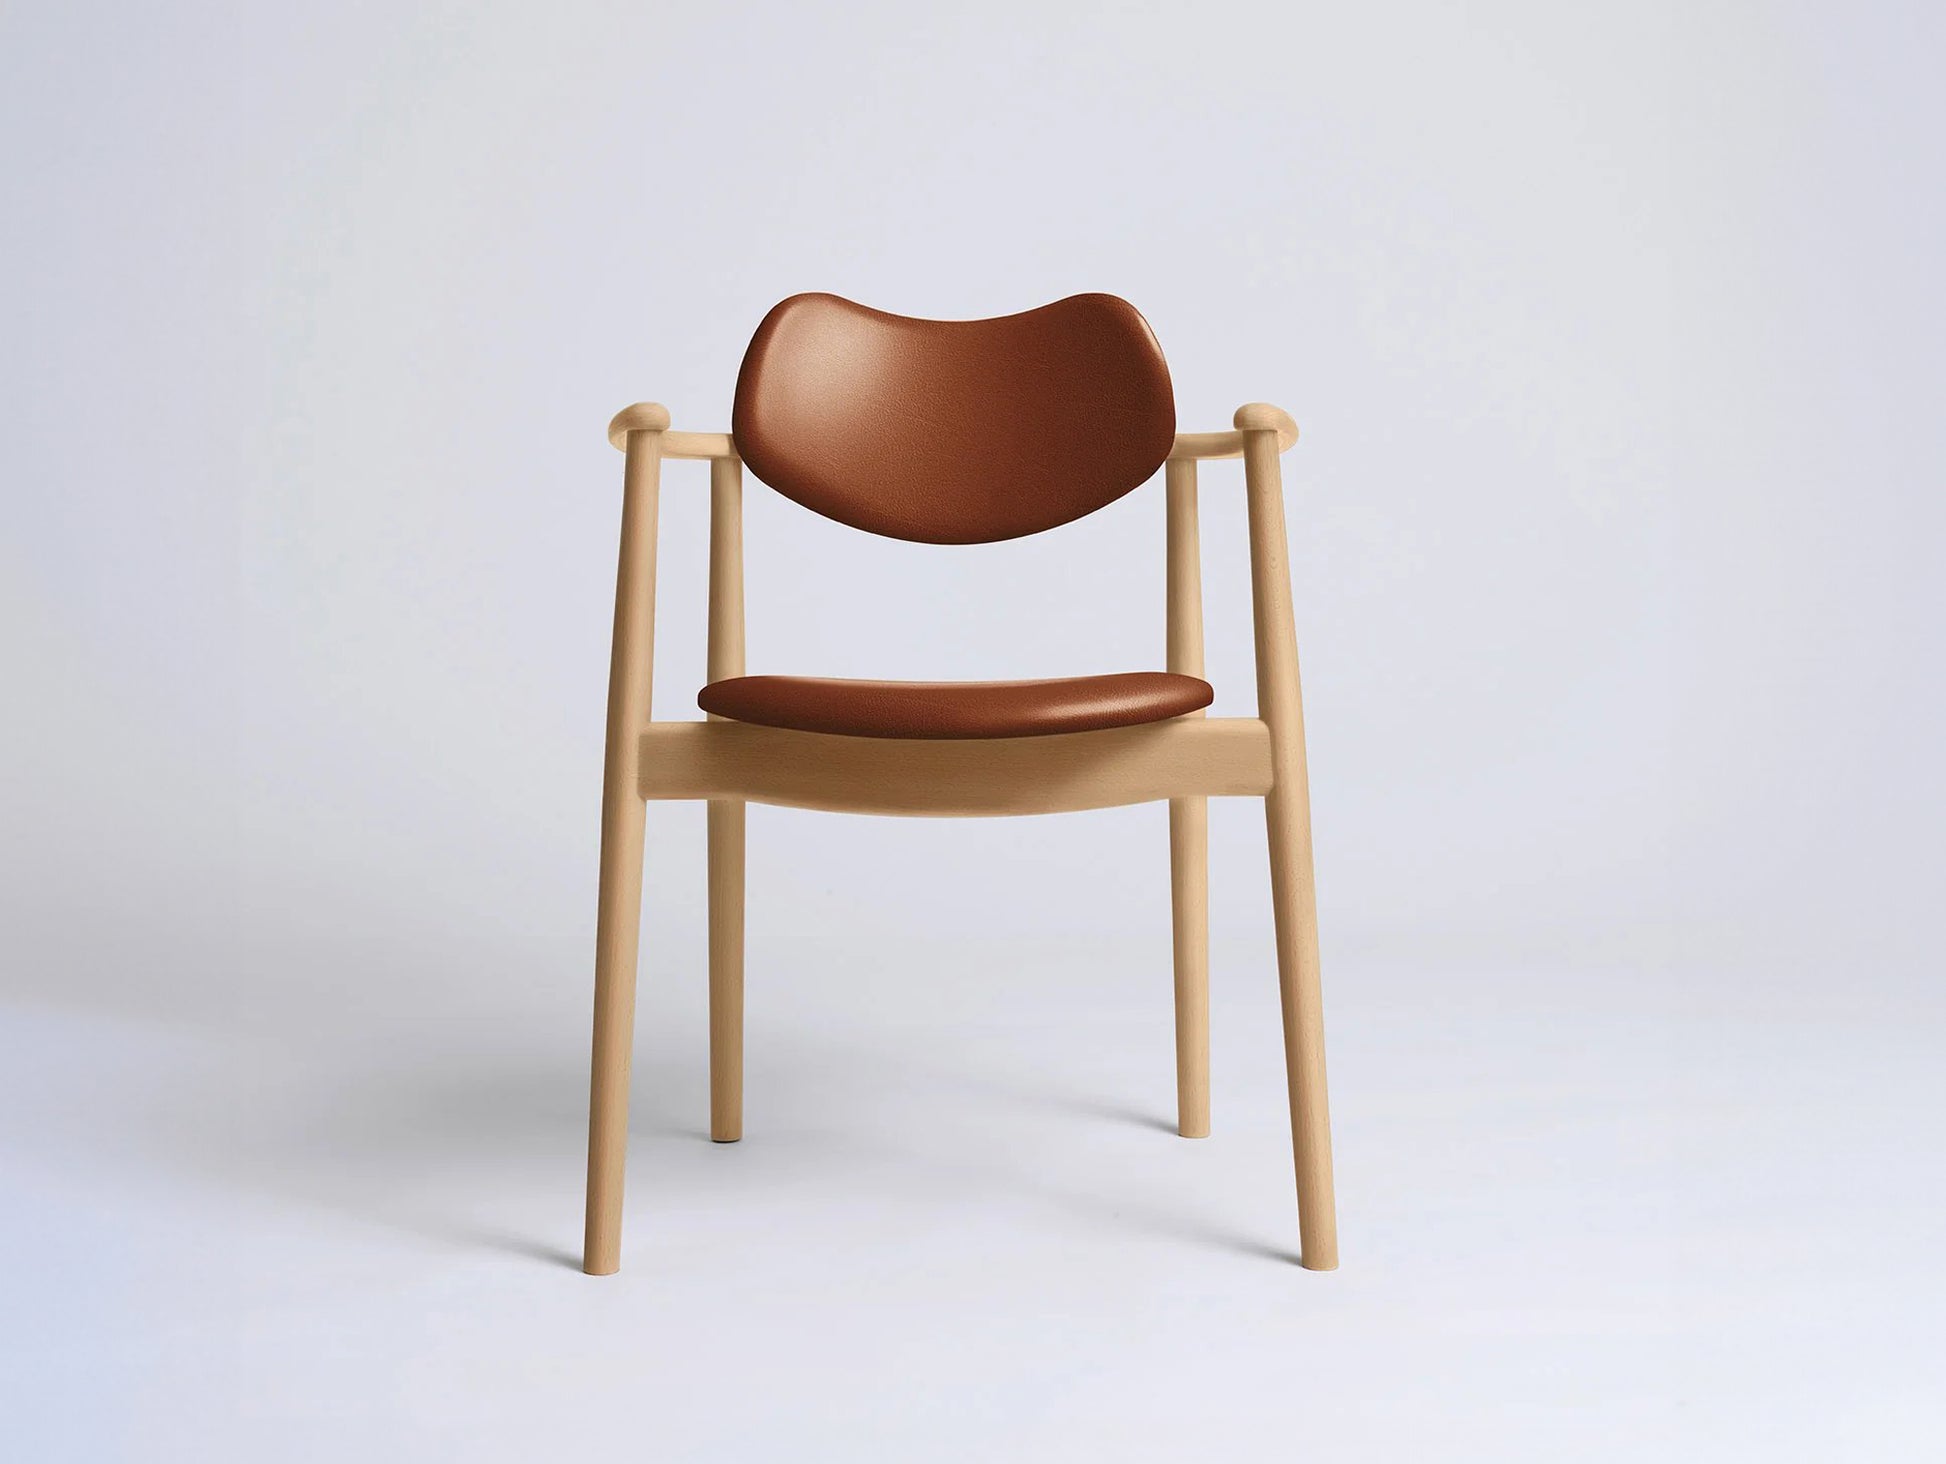 Regatta Chair Seat and Back Upholstered by Ro Collection - Oiled Beech / Exclusive Rio Cognac Leather